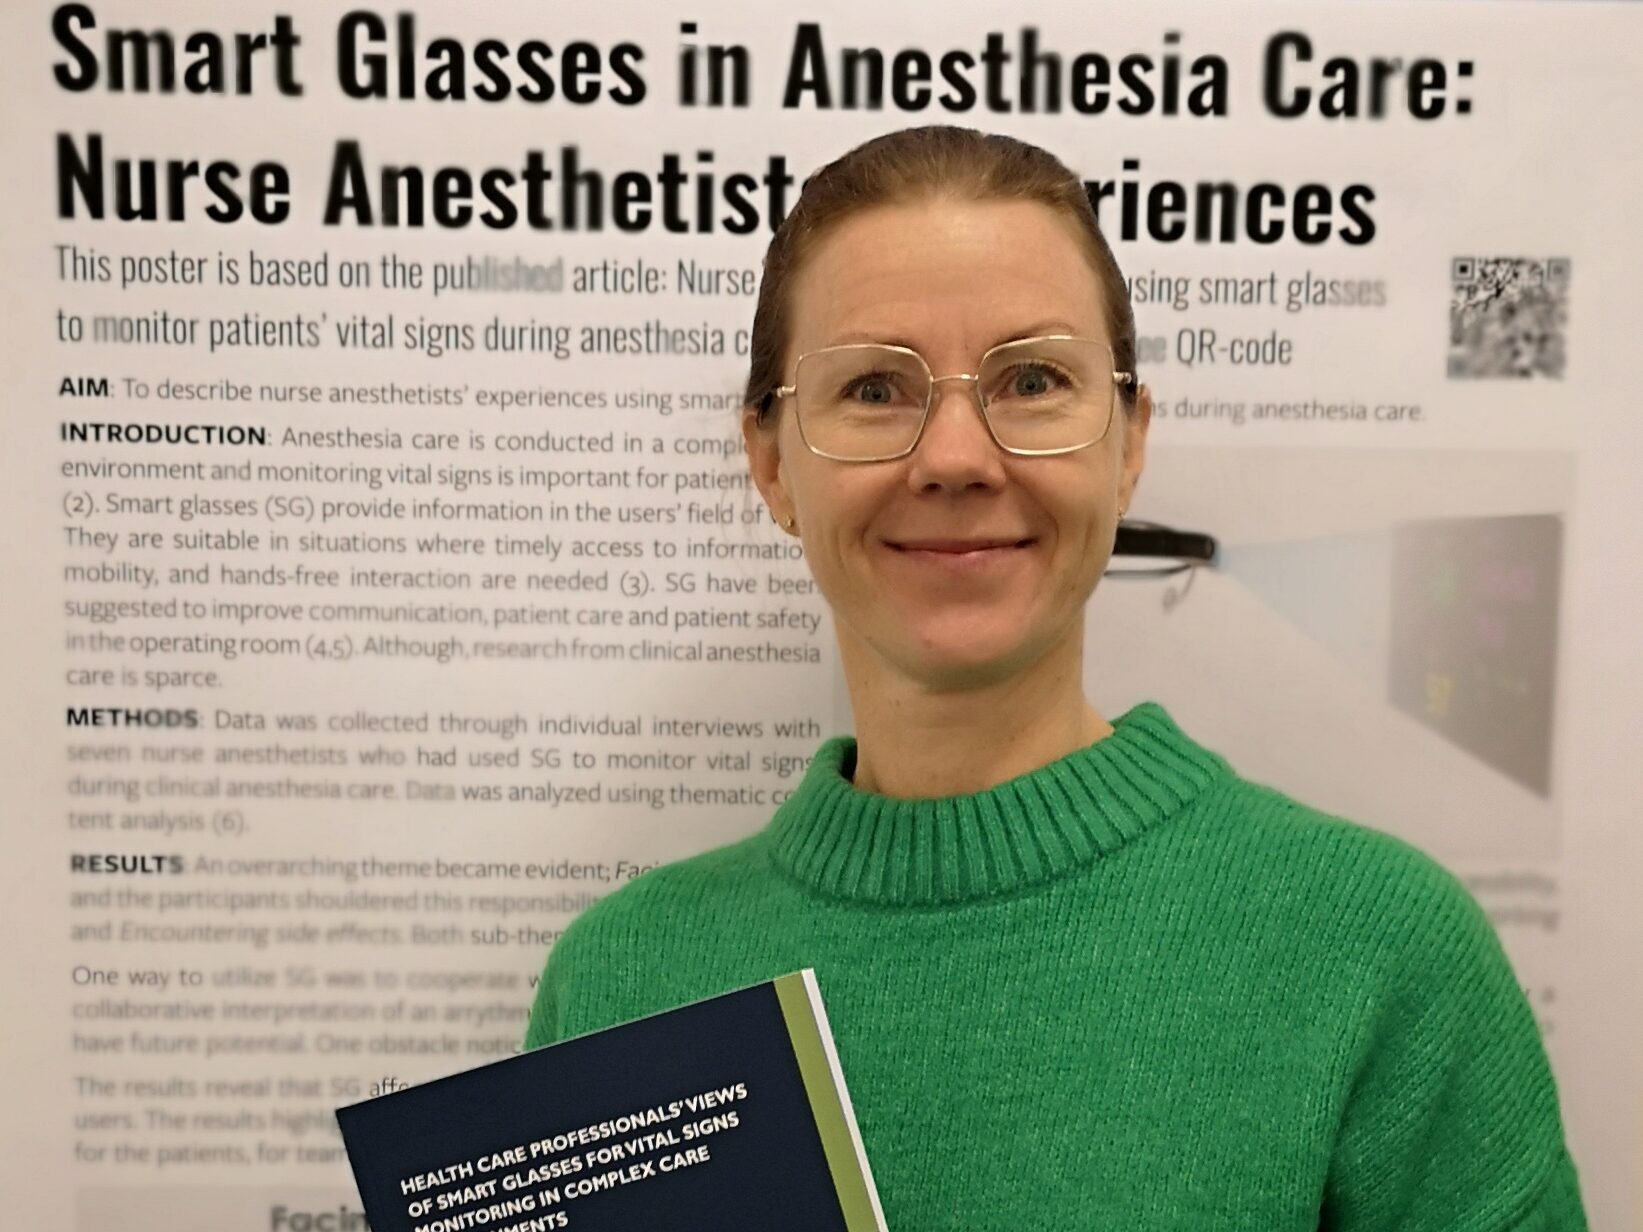 Health Care Professionals’ Views of Smart Glasses for Vital Signs Monitoring in Complex Care Environments